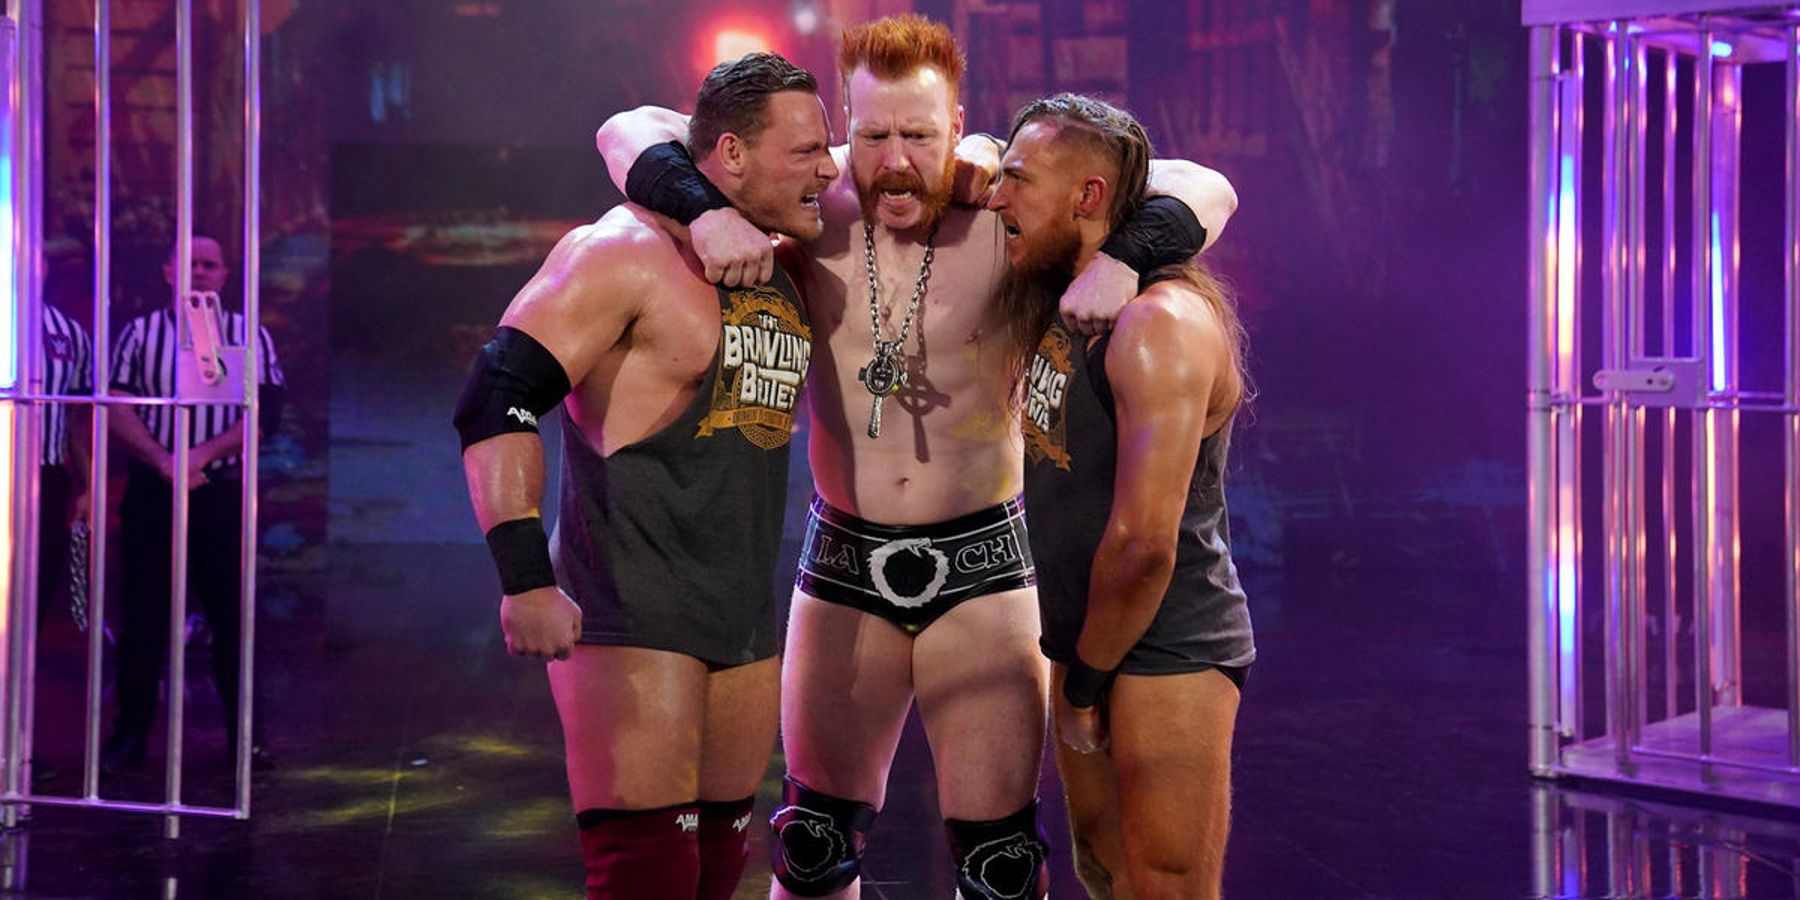 Sheamus and his Brawling Brutes stable get hyped for the WarGames match at WWE Survivor Series 2022.